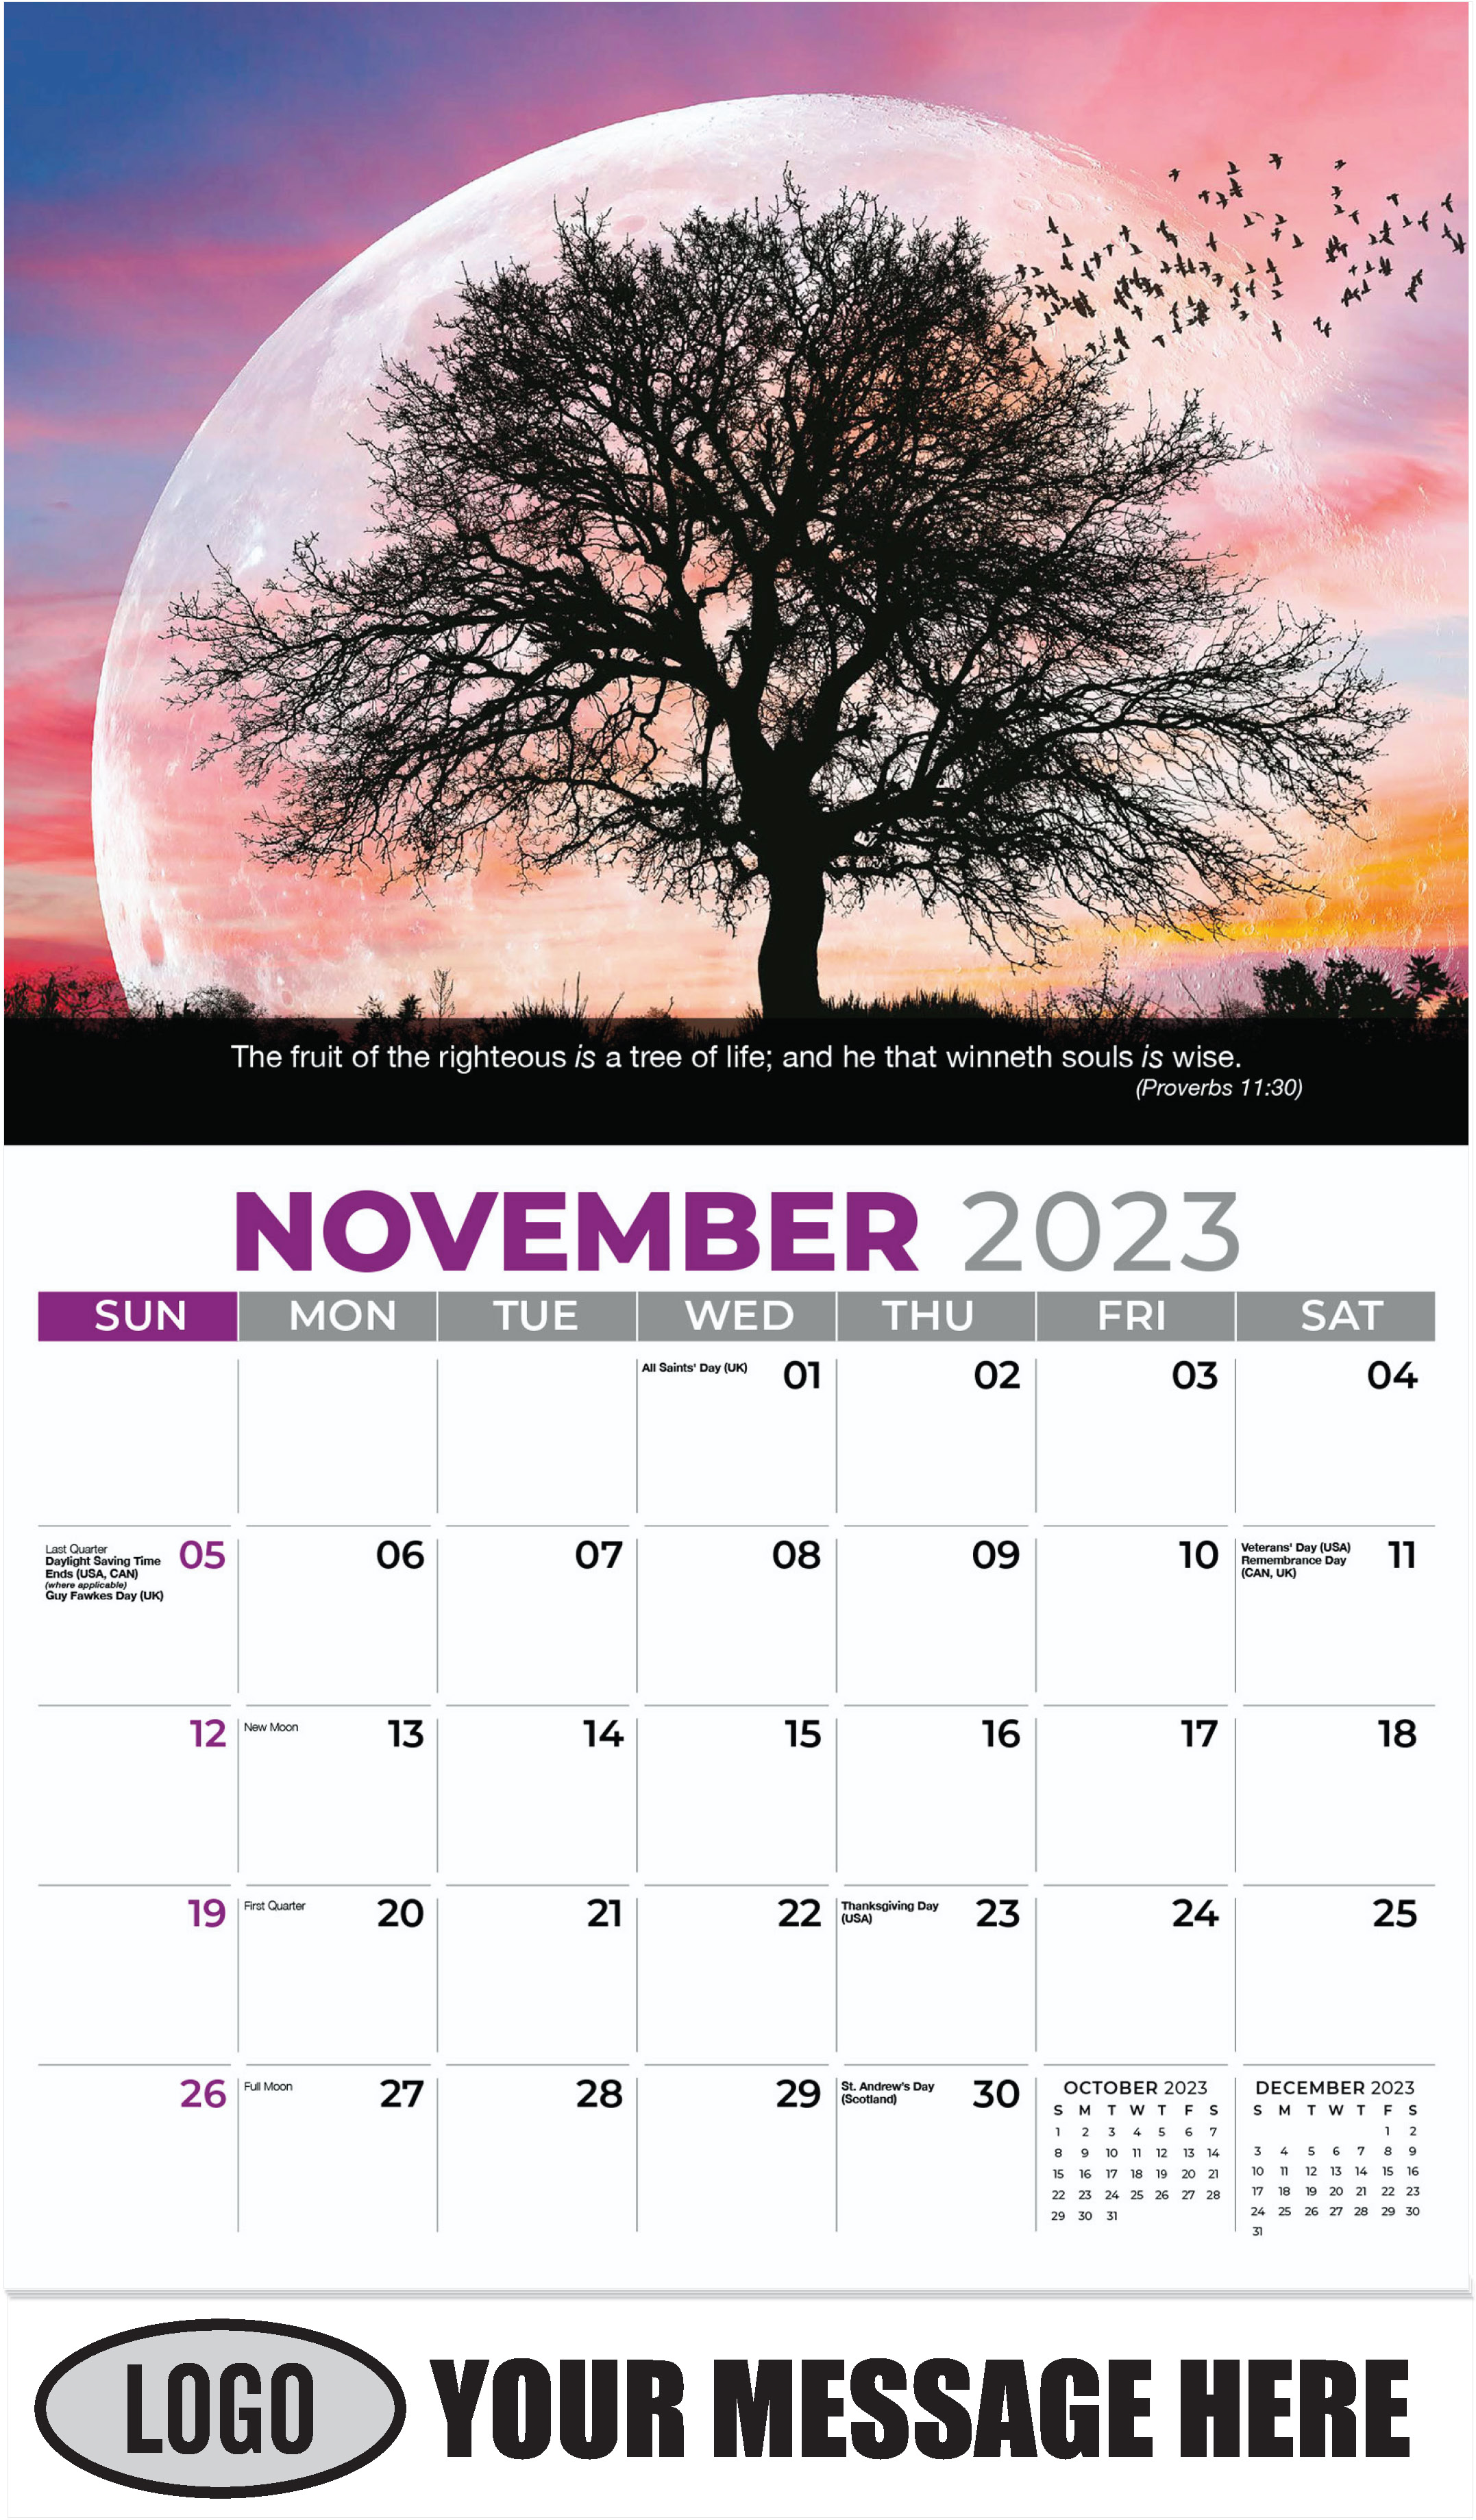 tree with sunset and birds - November - Faith Passages 2023 Promotional Calendar